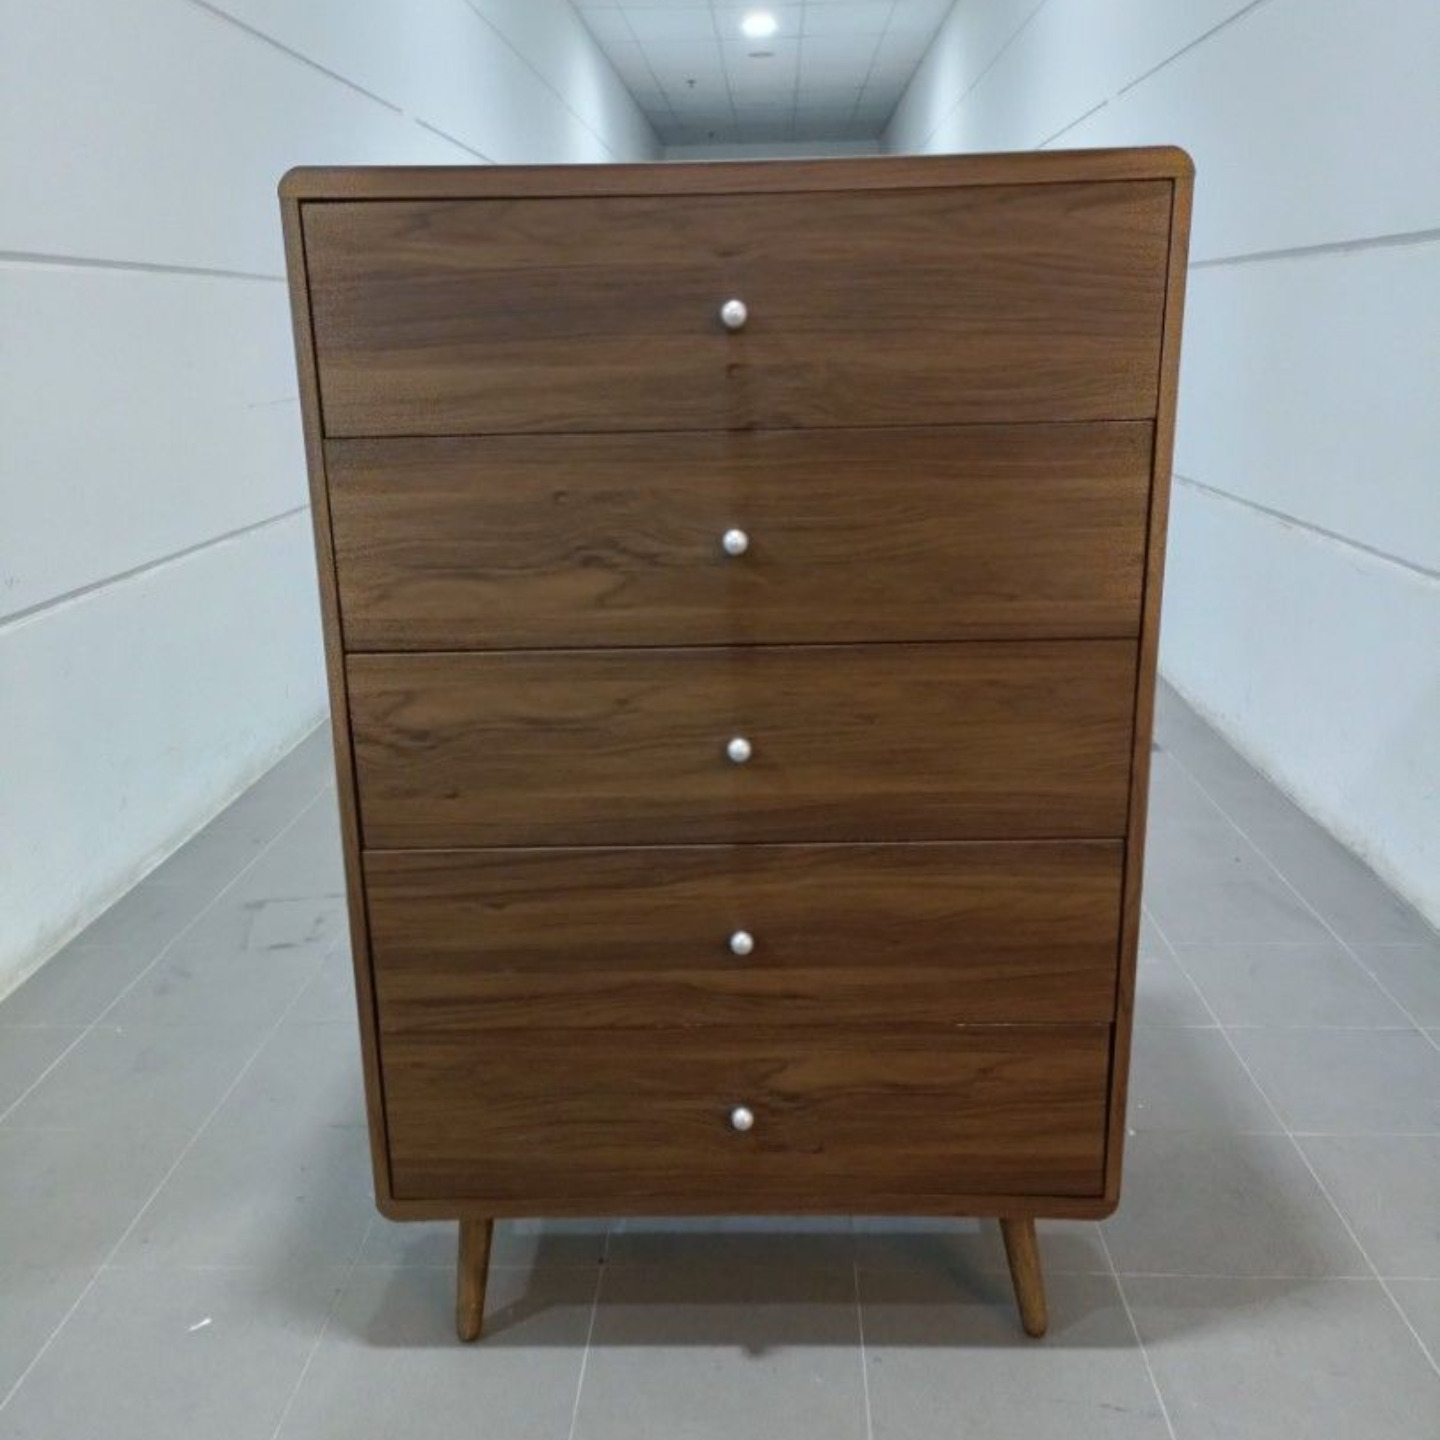 RELON Chest of Drawers in WALNUT